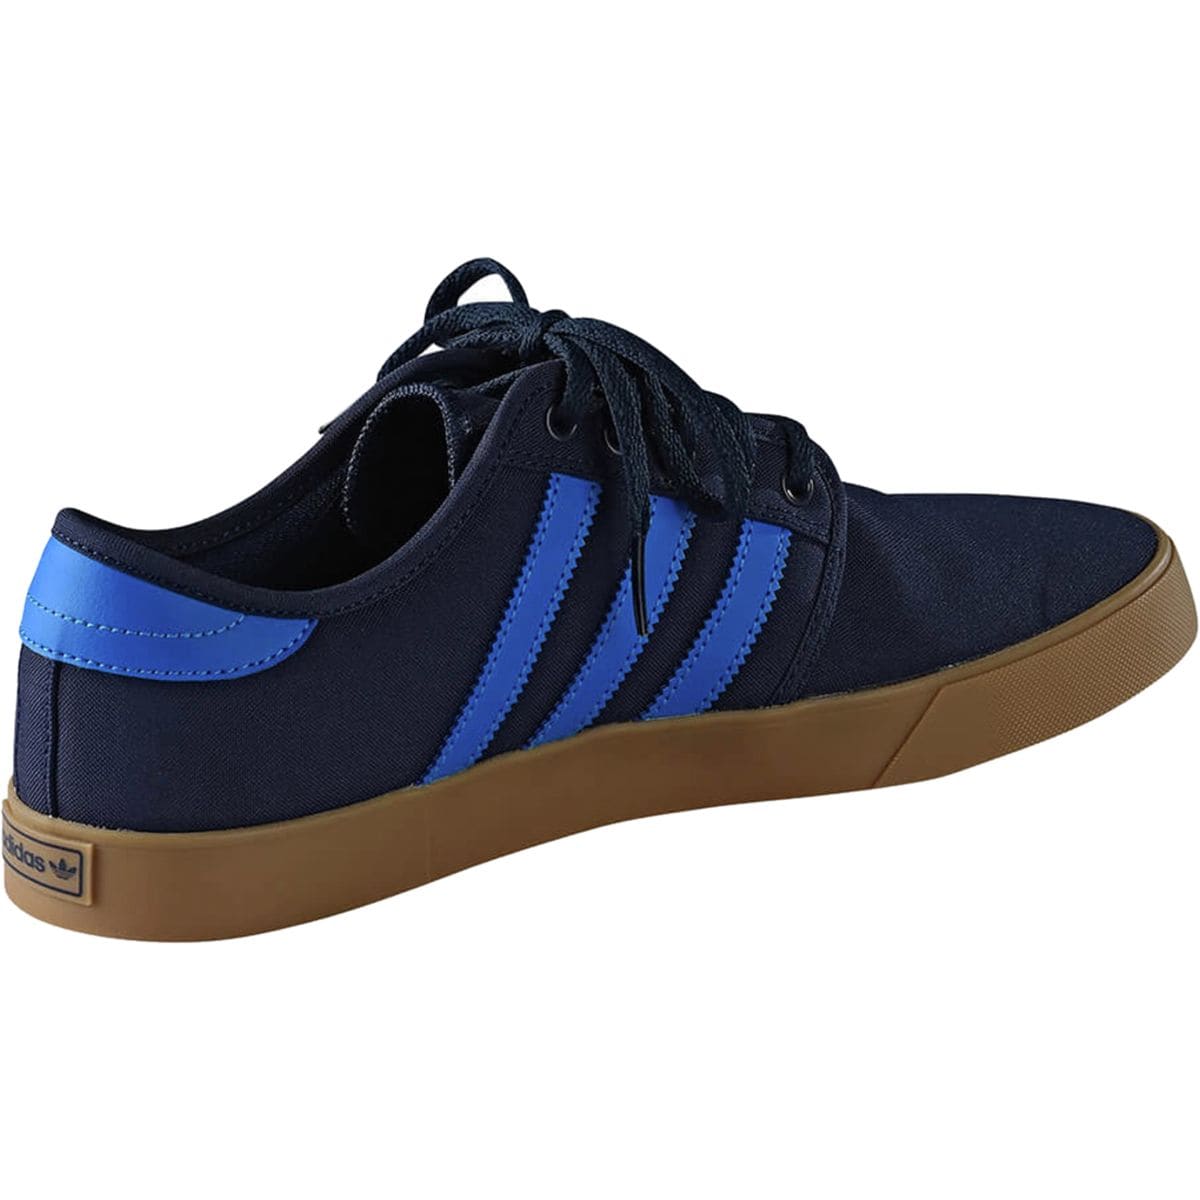 tld adidas seeley shoes